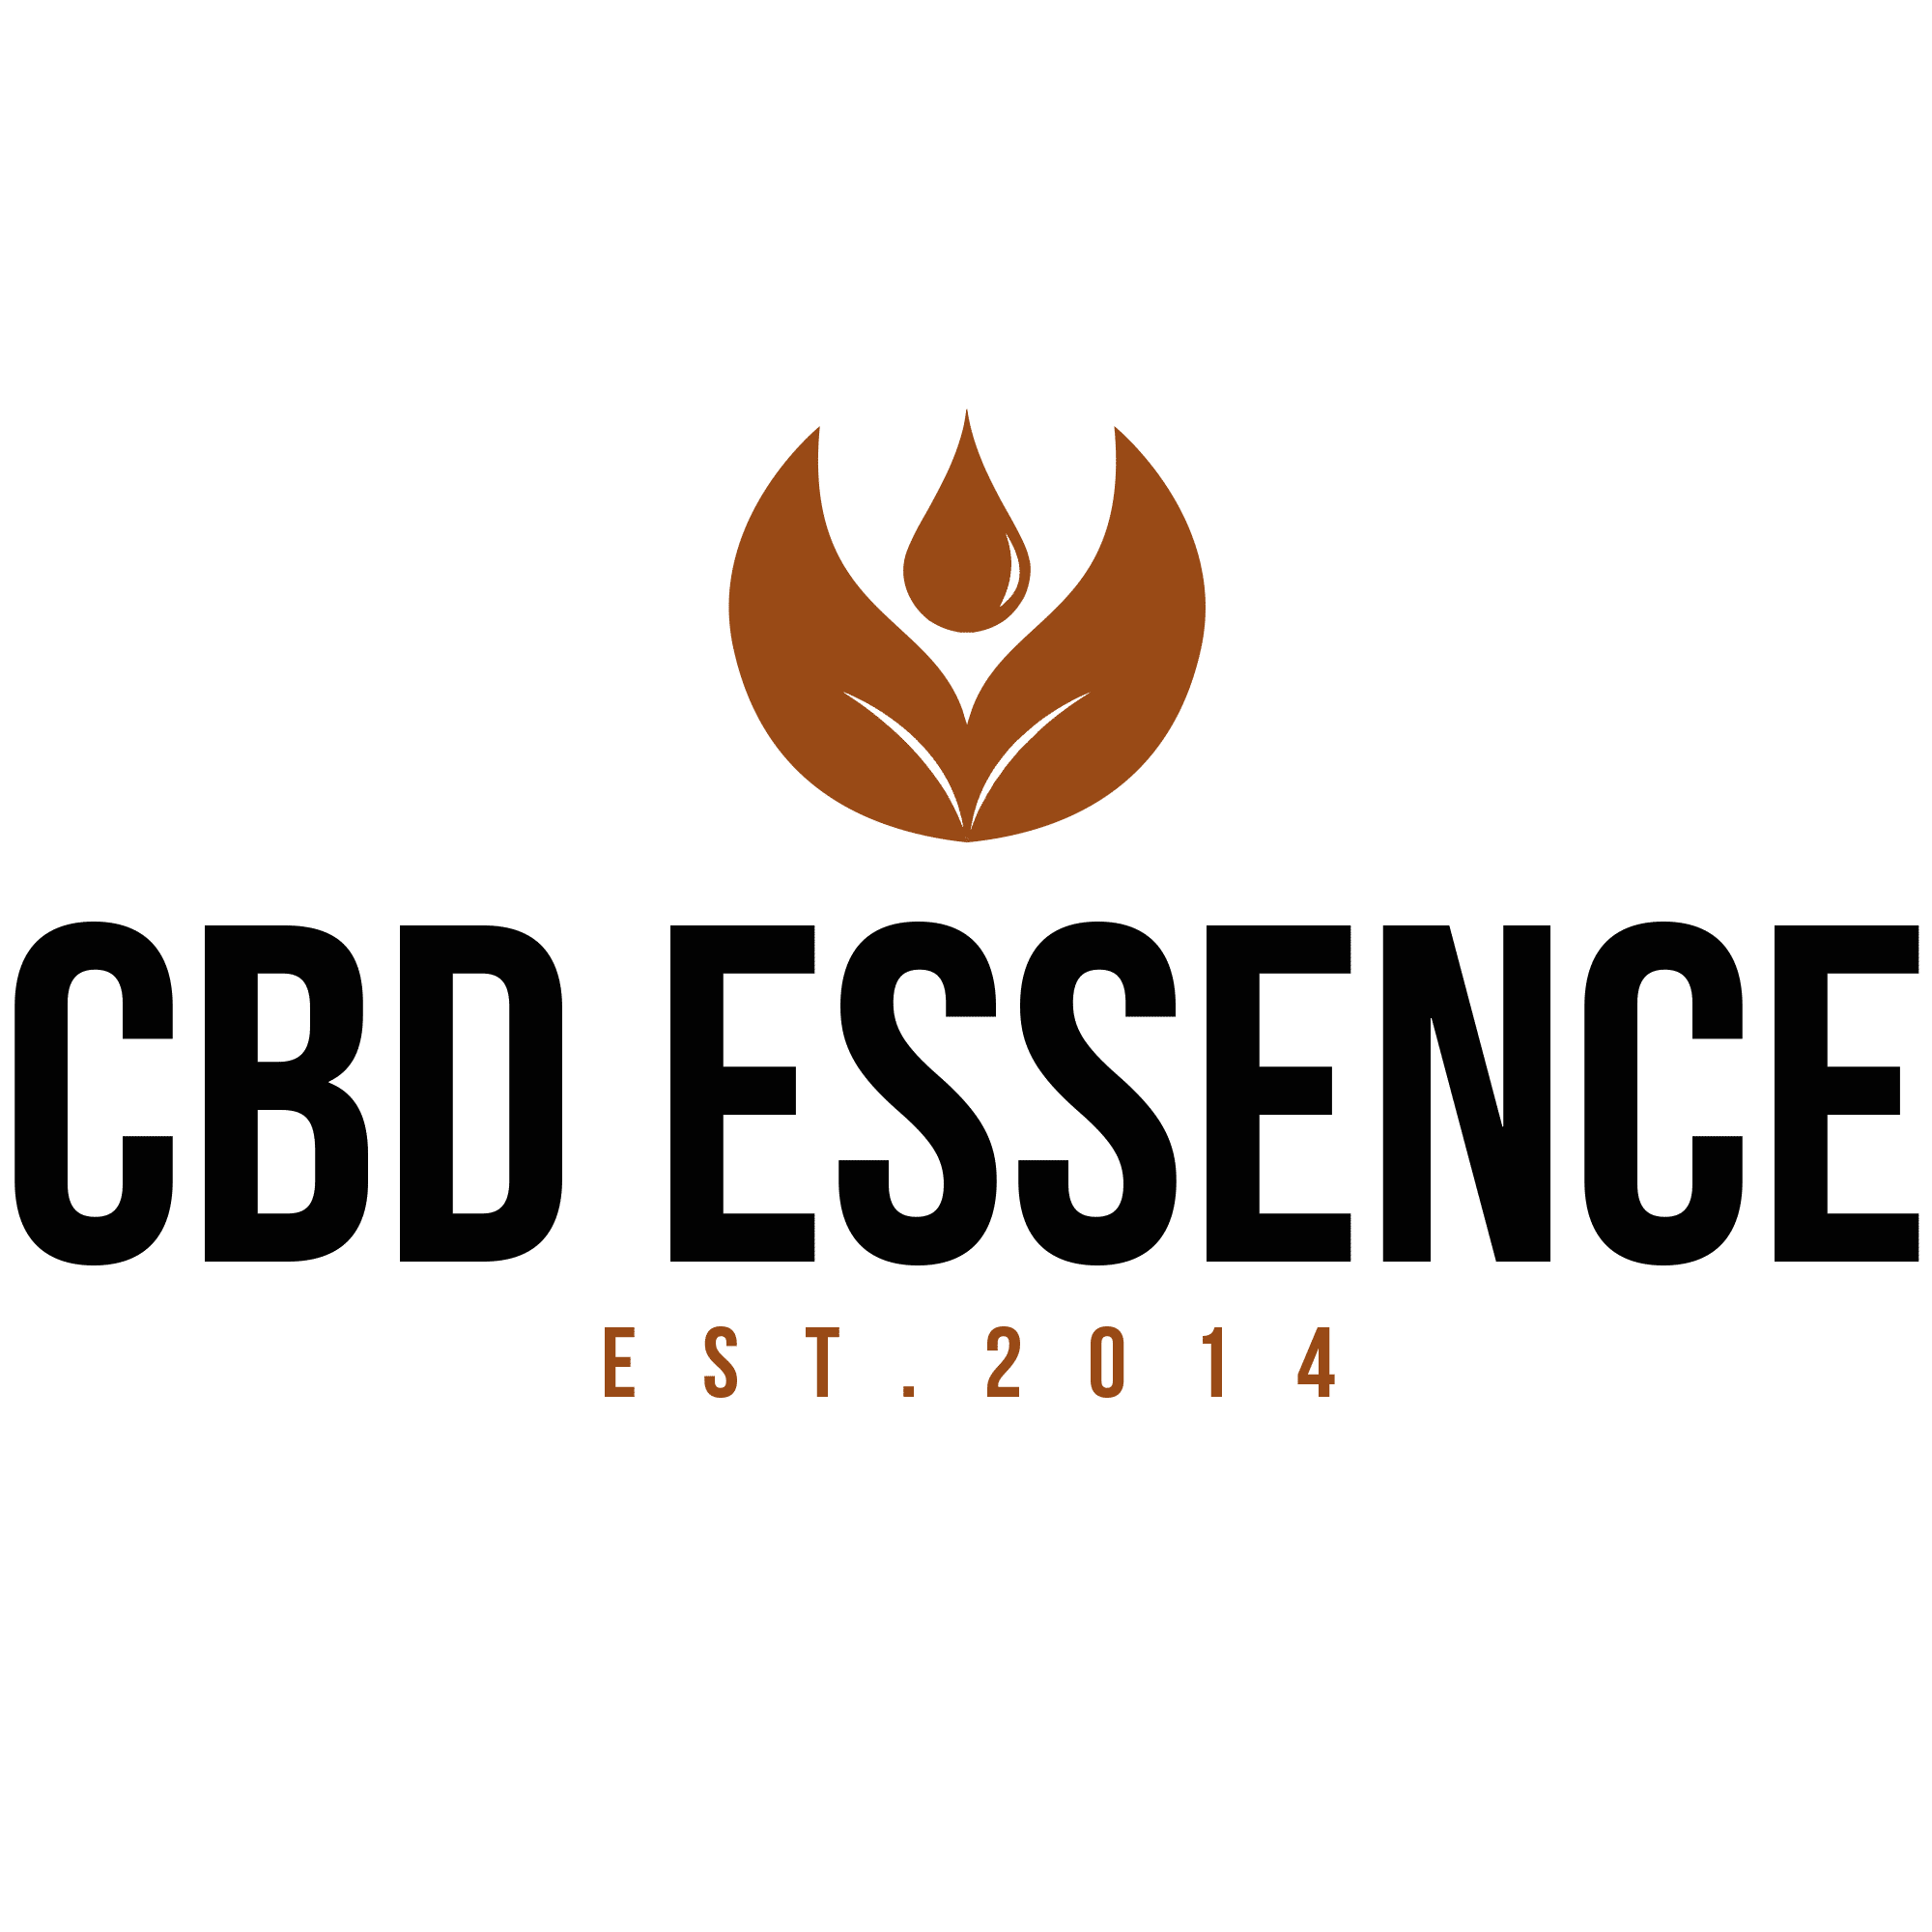 Discover how the Essence CBD Oil Tincture works in the brain and in your body, and free yourself from pain and tension in the body, it is time to work on the well-being of your body in an organic 100% natural way